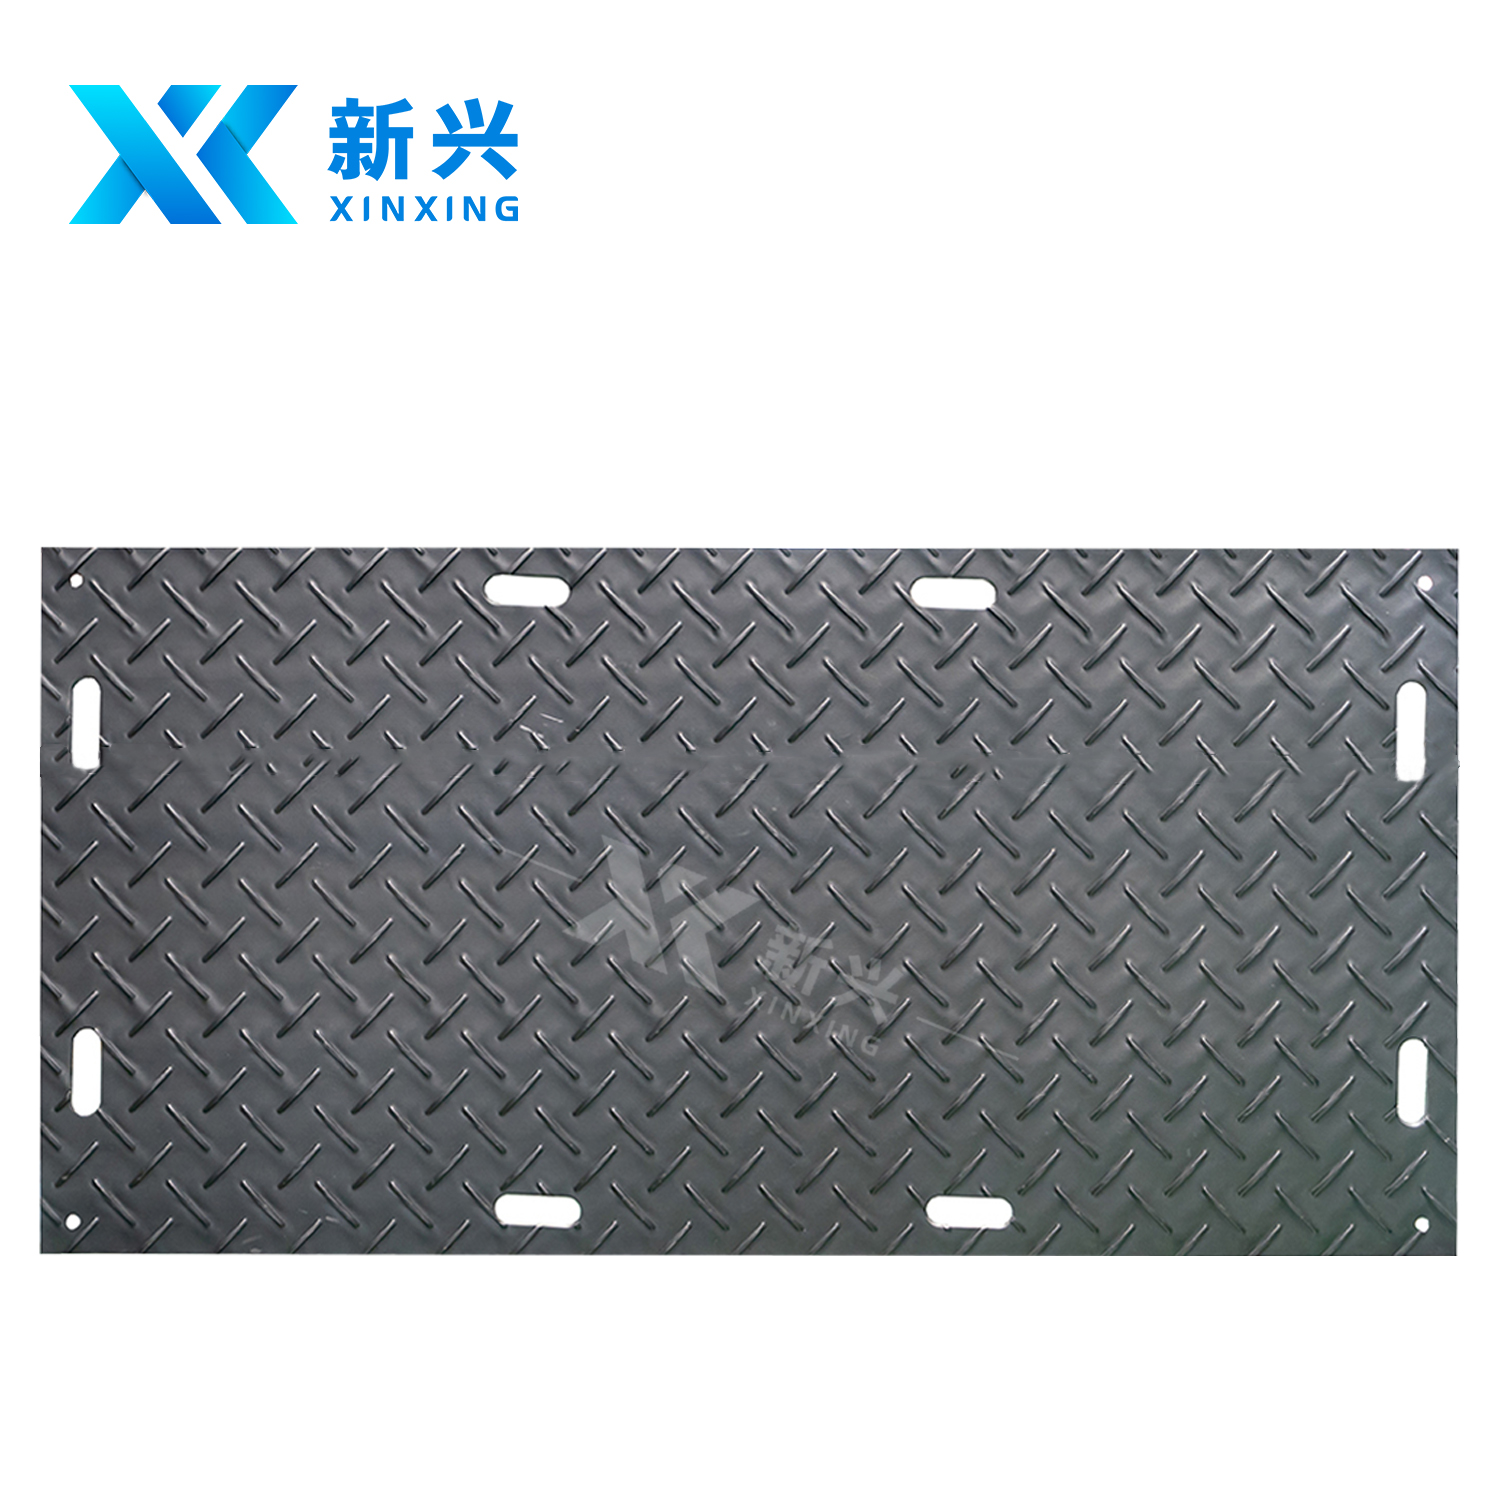 HDPE Extruded Board Bog Mat Track Mat Road Way System Durable Antslip HDPE Temporary Road Mats